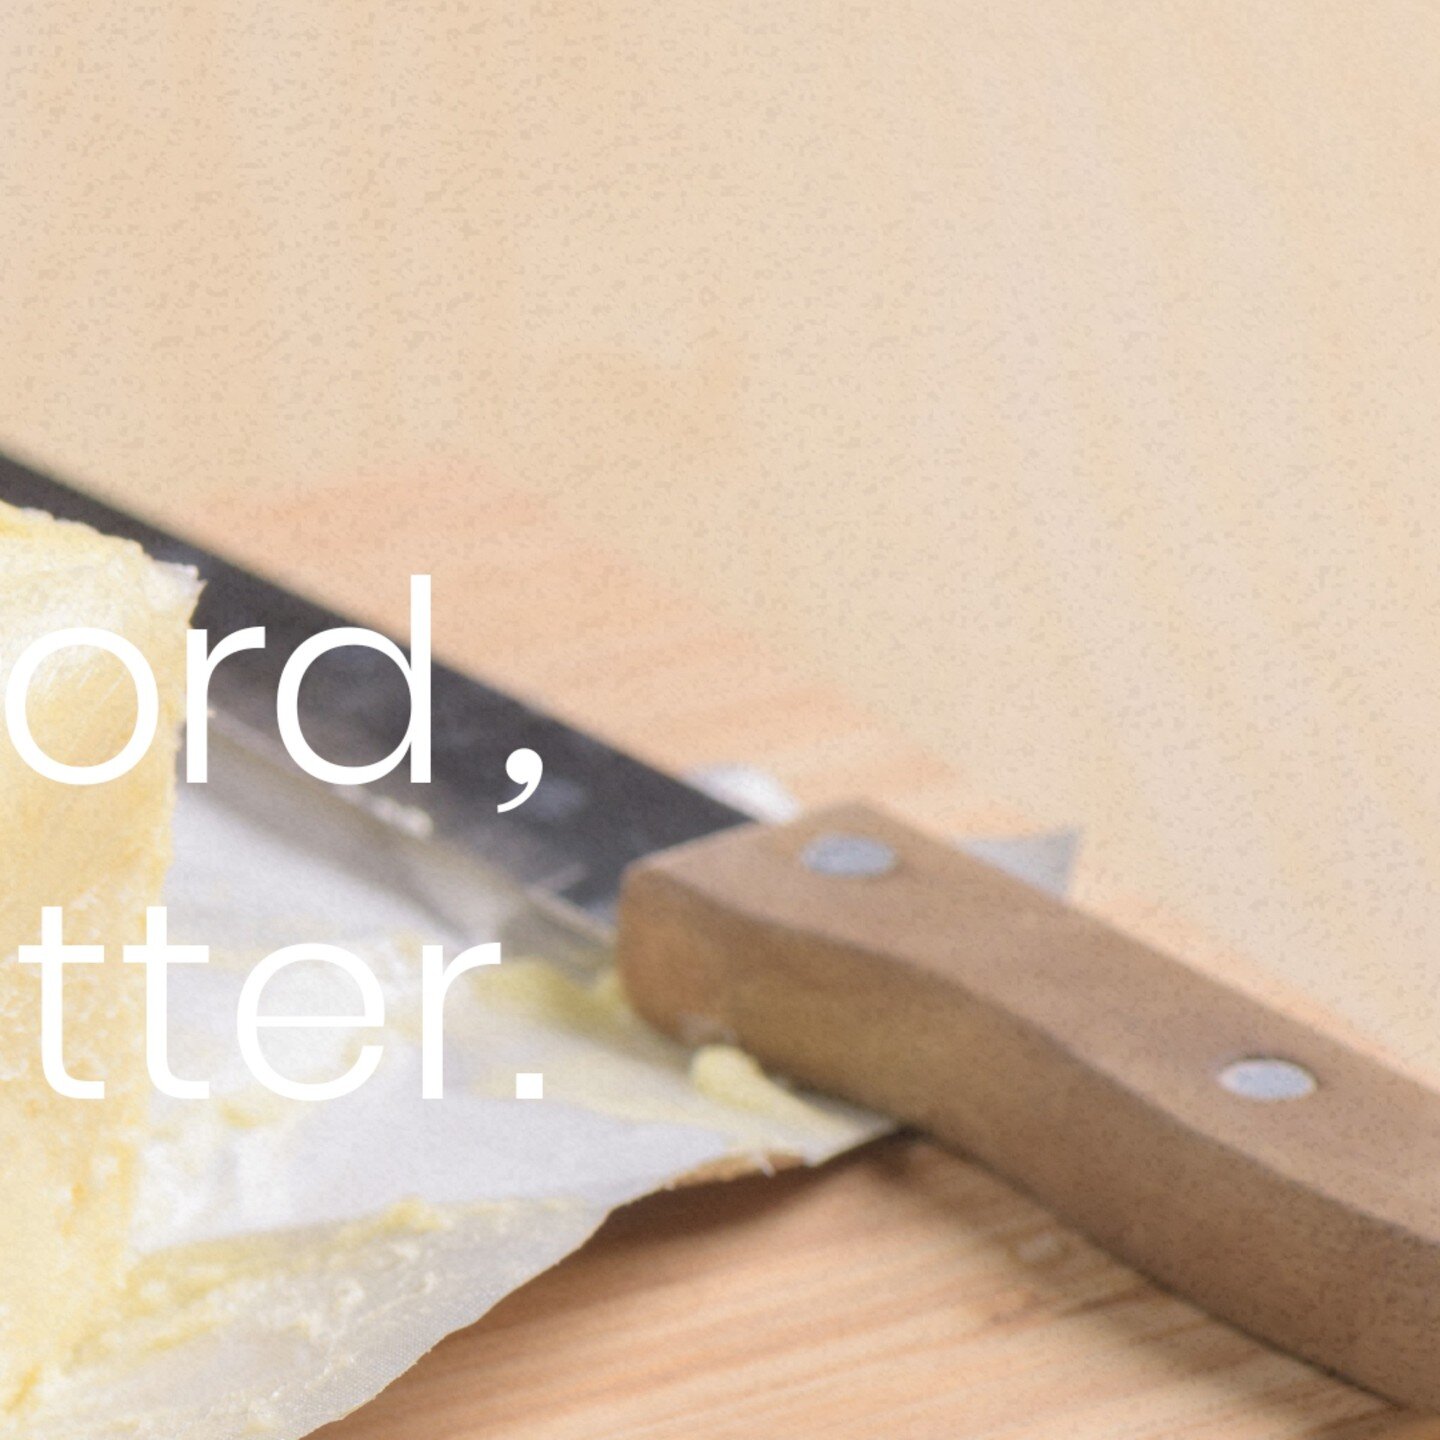 We spread the good word, like smooth butter. 🧈 🎵*plays BTS - Butter *🎵

Based in little red dot, we are a digital marketing agency that aims to help business succeed in the digitalised world. 

We are always ready to help! Just shoot us a DM, and 